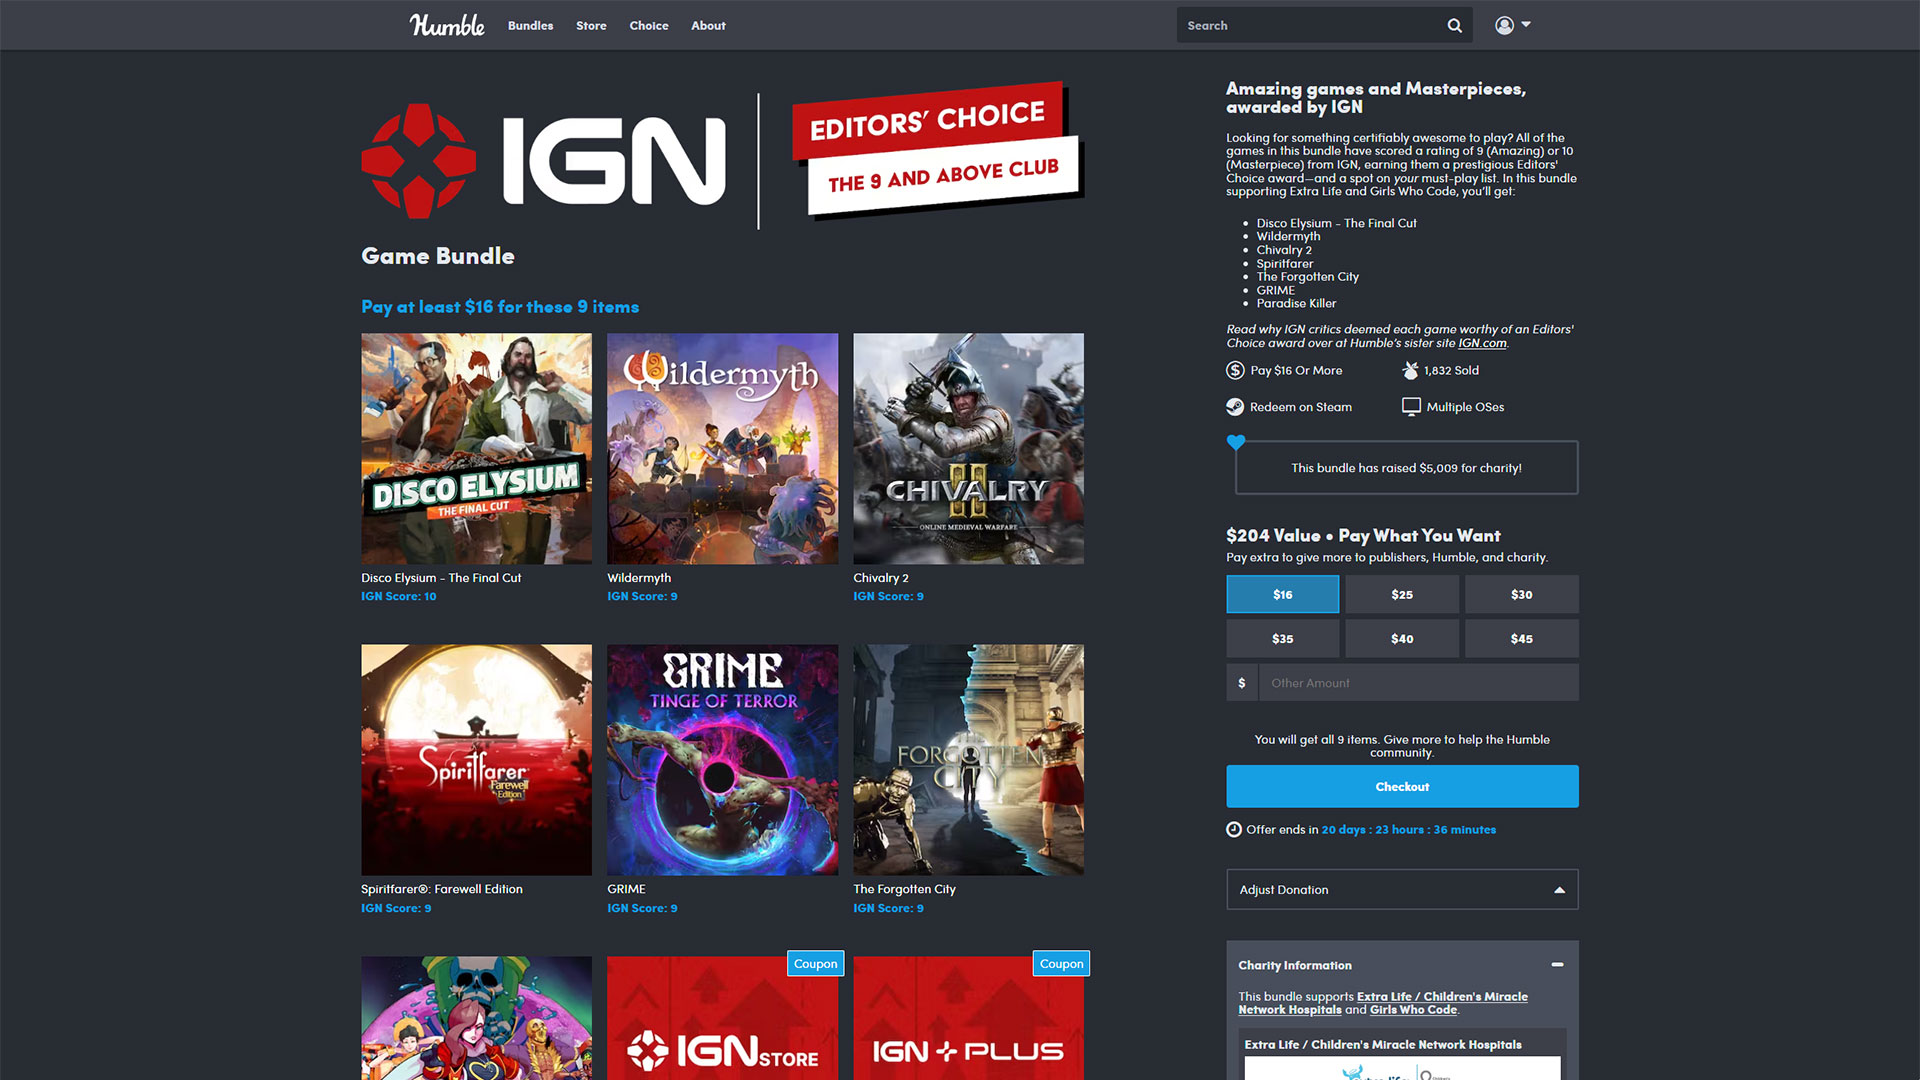 The IGN Editors' Choice Humble Bundle is now available